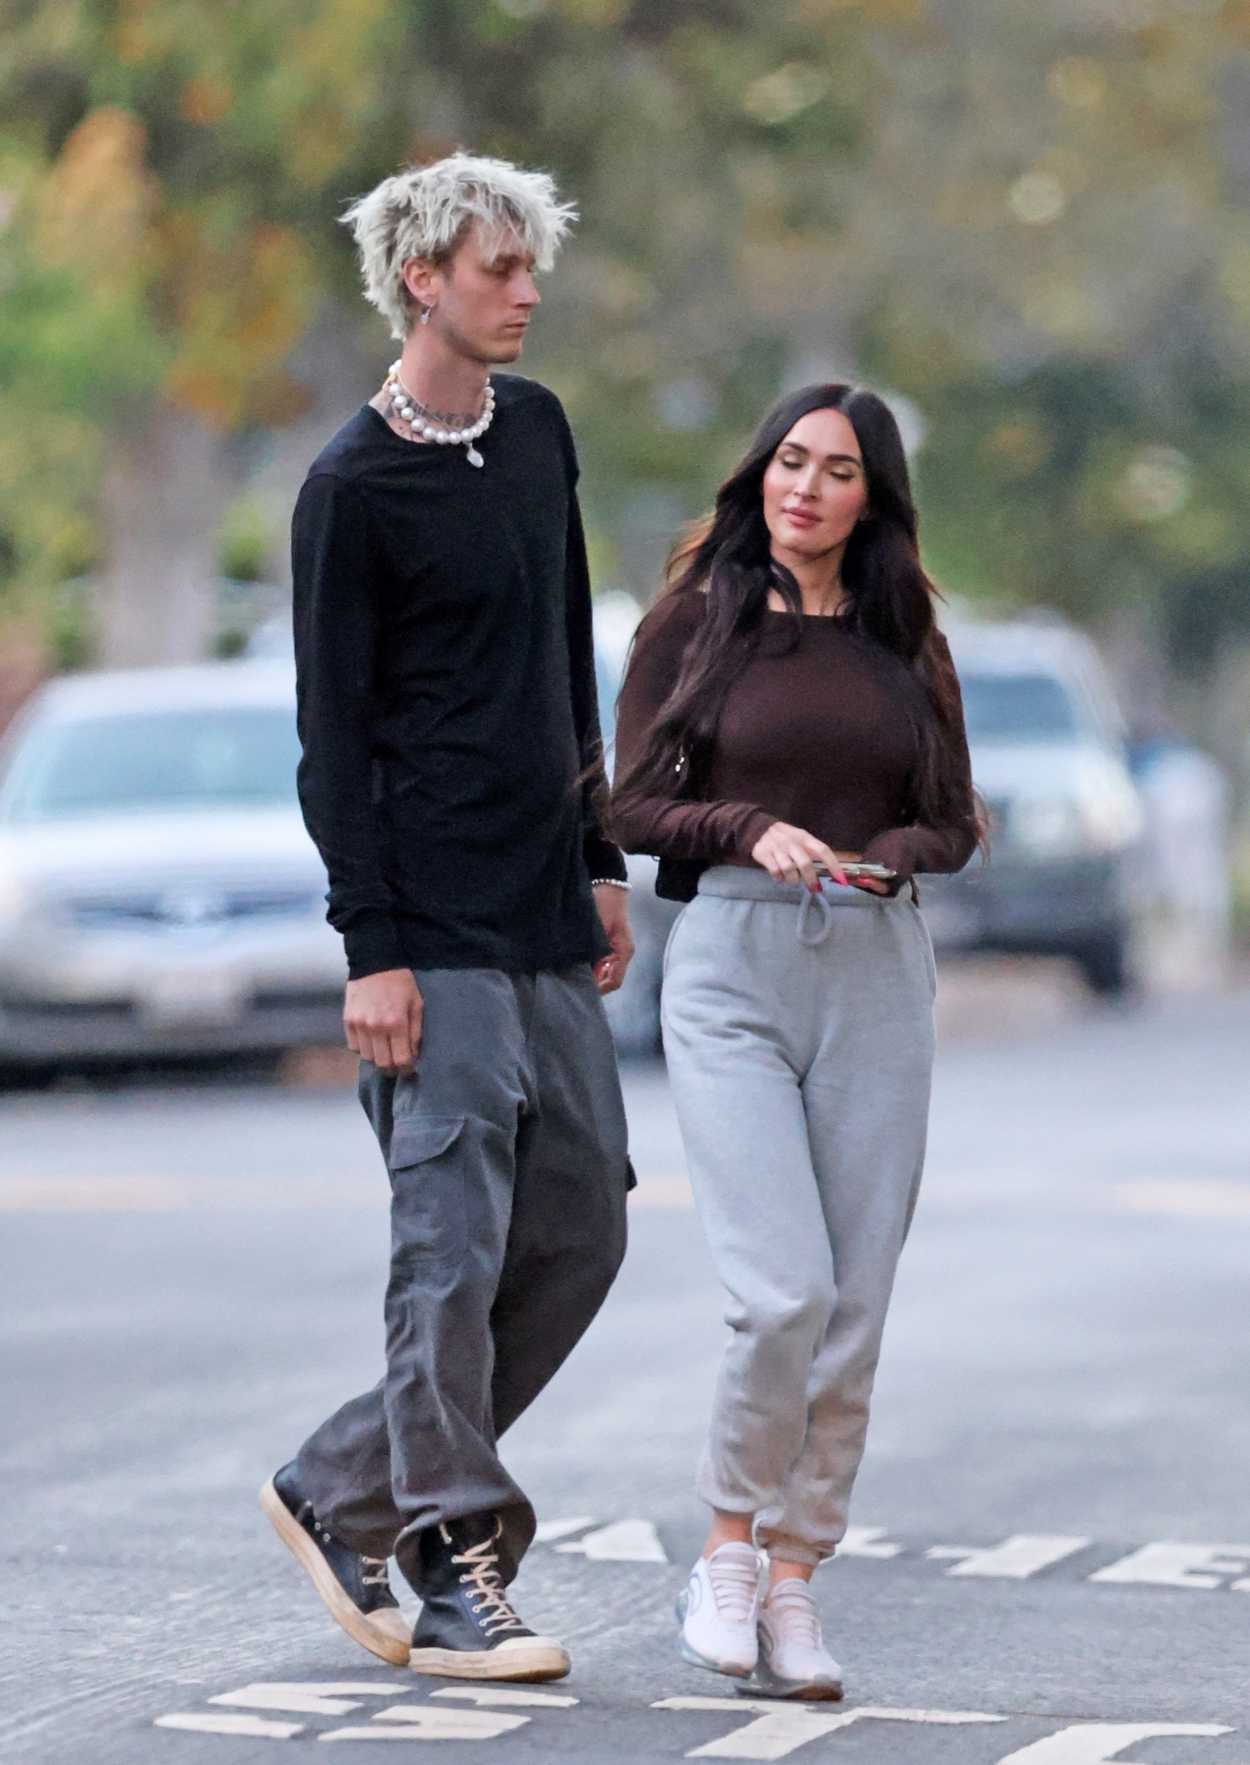 Megan Fox in a Gray Sweatpants Was Seen Out with Machine Gun Kelly in ...